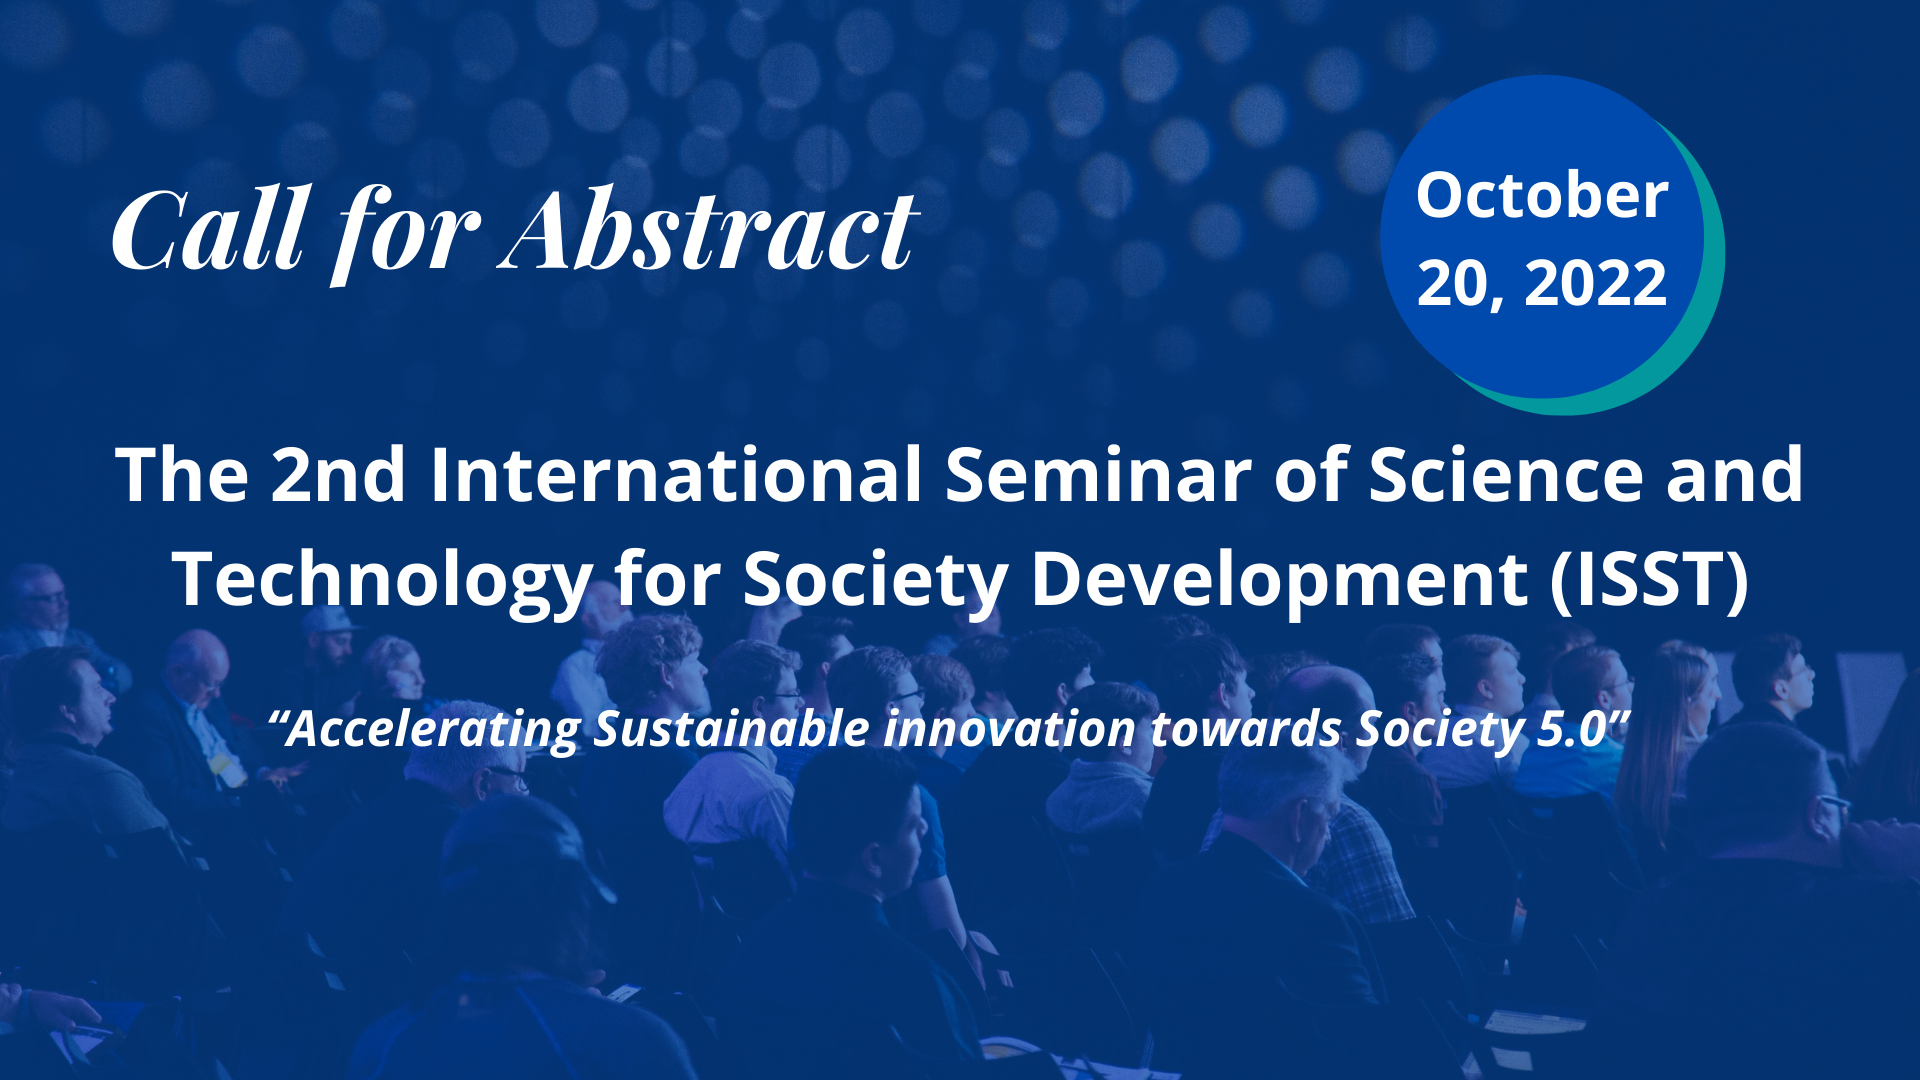 Call for Abstract The 2nd International Seminar of Science and Technology for Society Development (ISST)